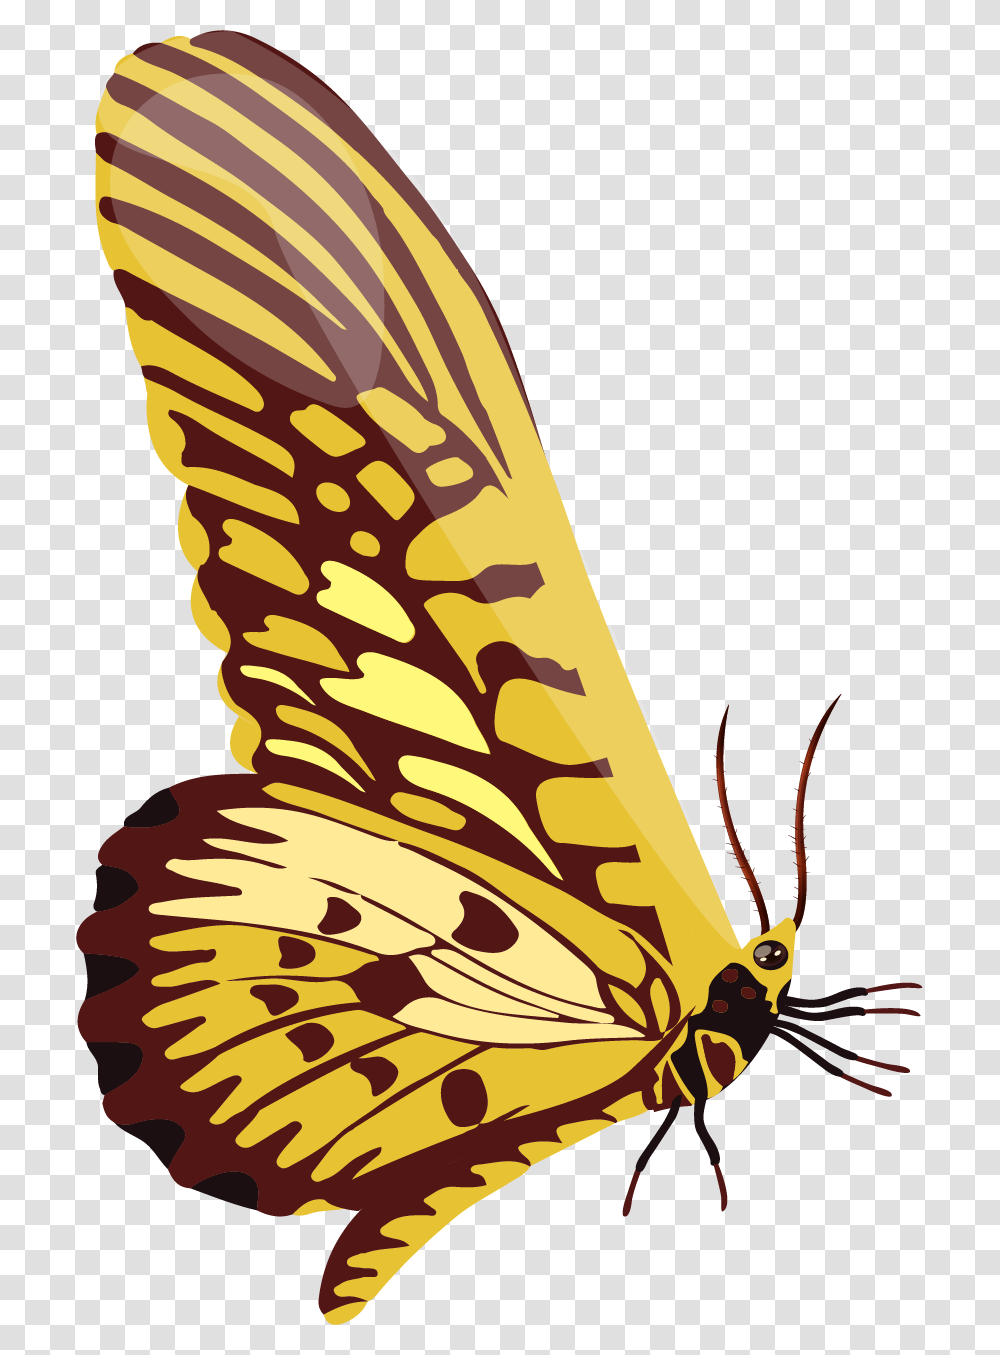 Swallowtail Butterfly, Insect, Invertebrate, Animal, Bird Transparent Png